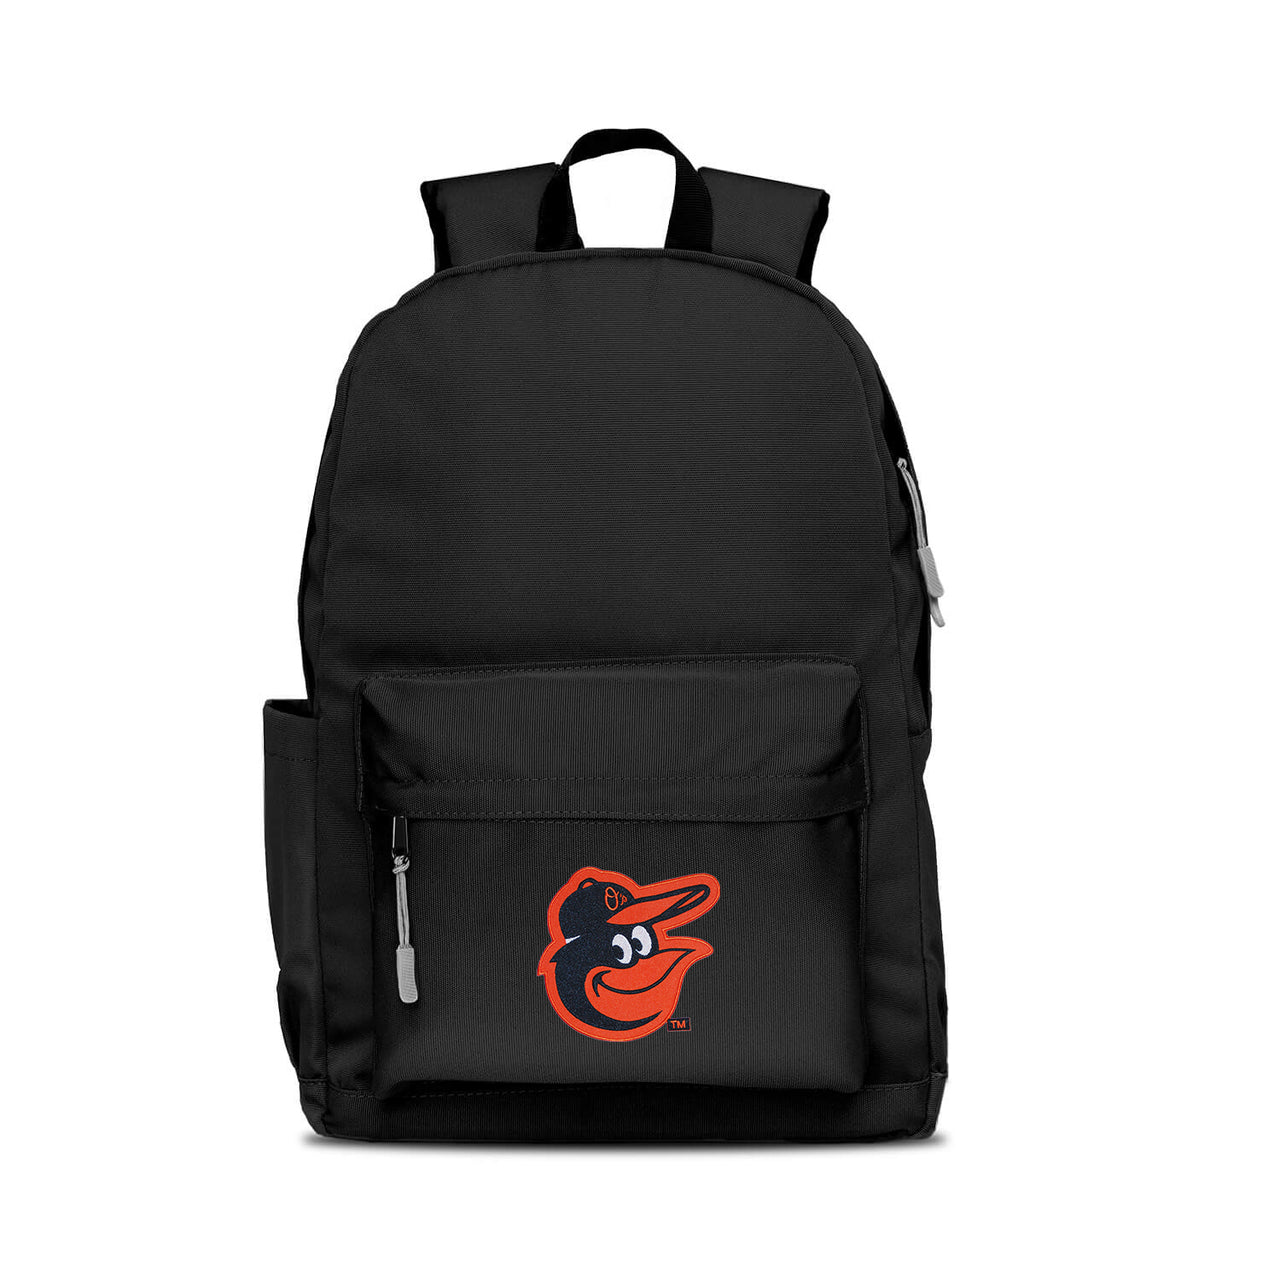 Baltimore Orioles Campus Backpack-Black